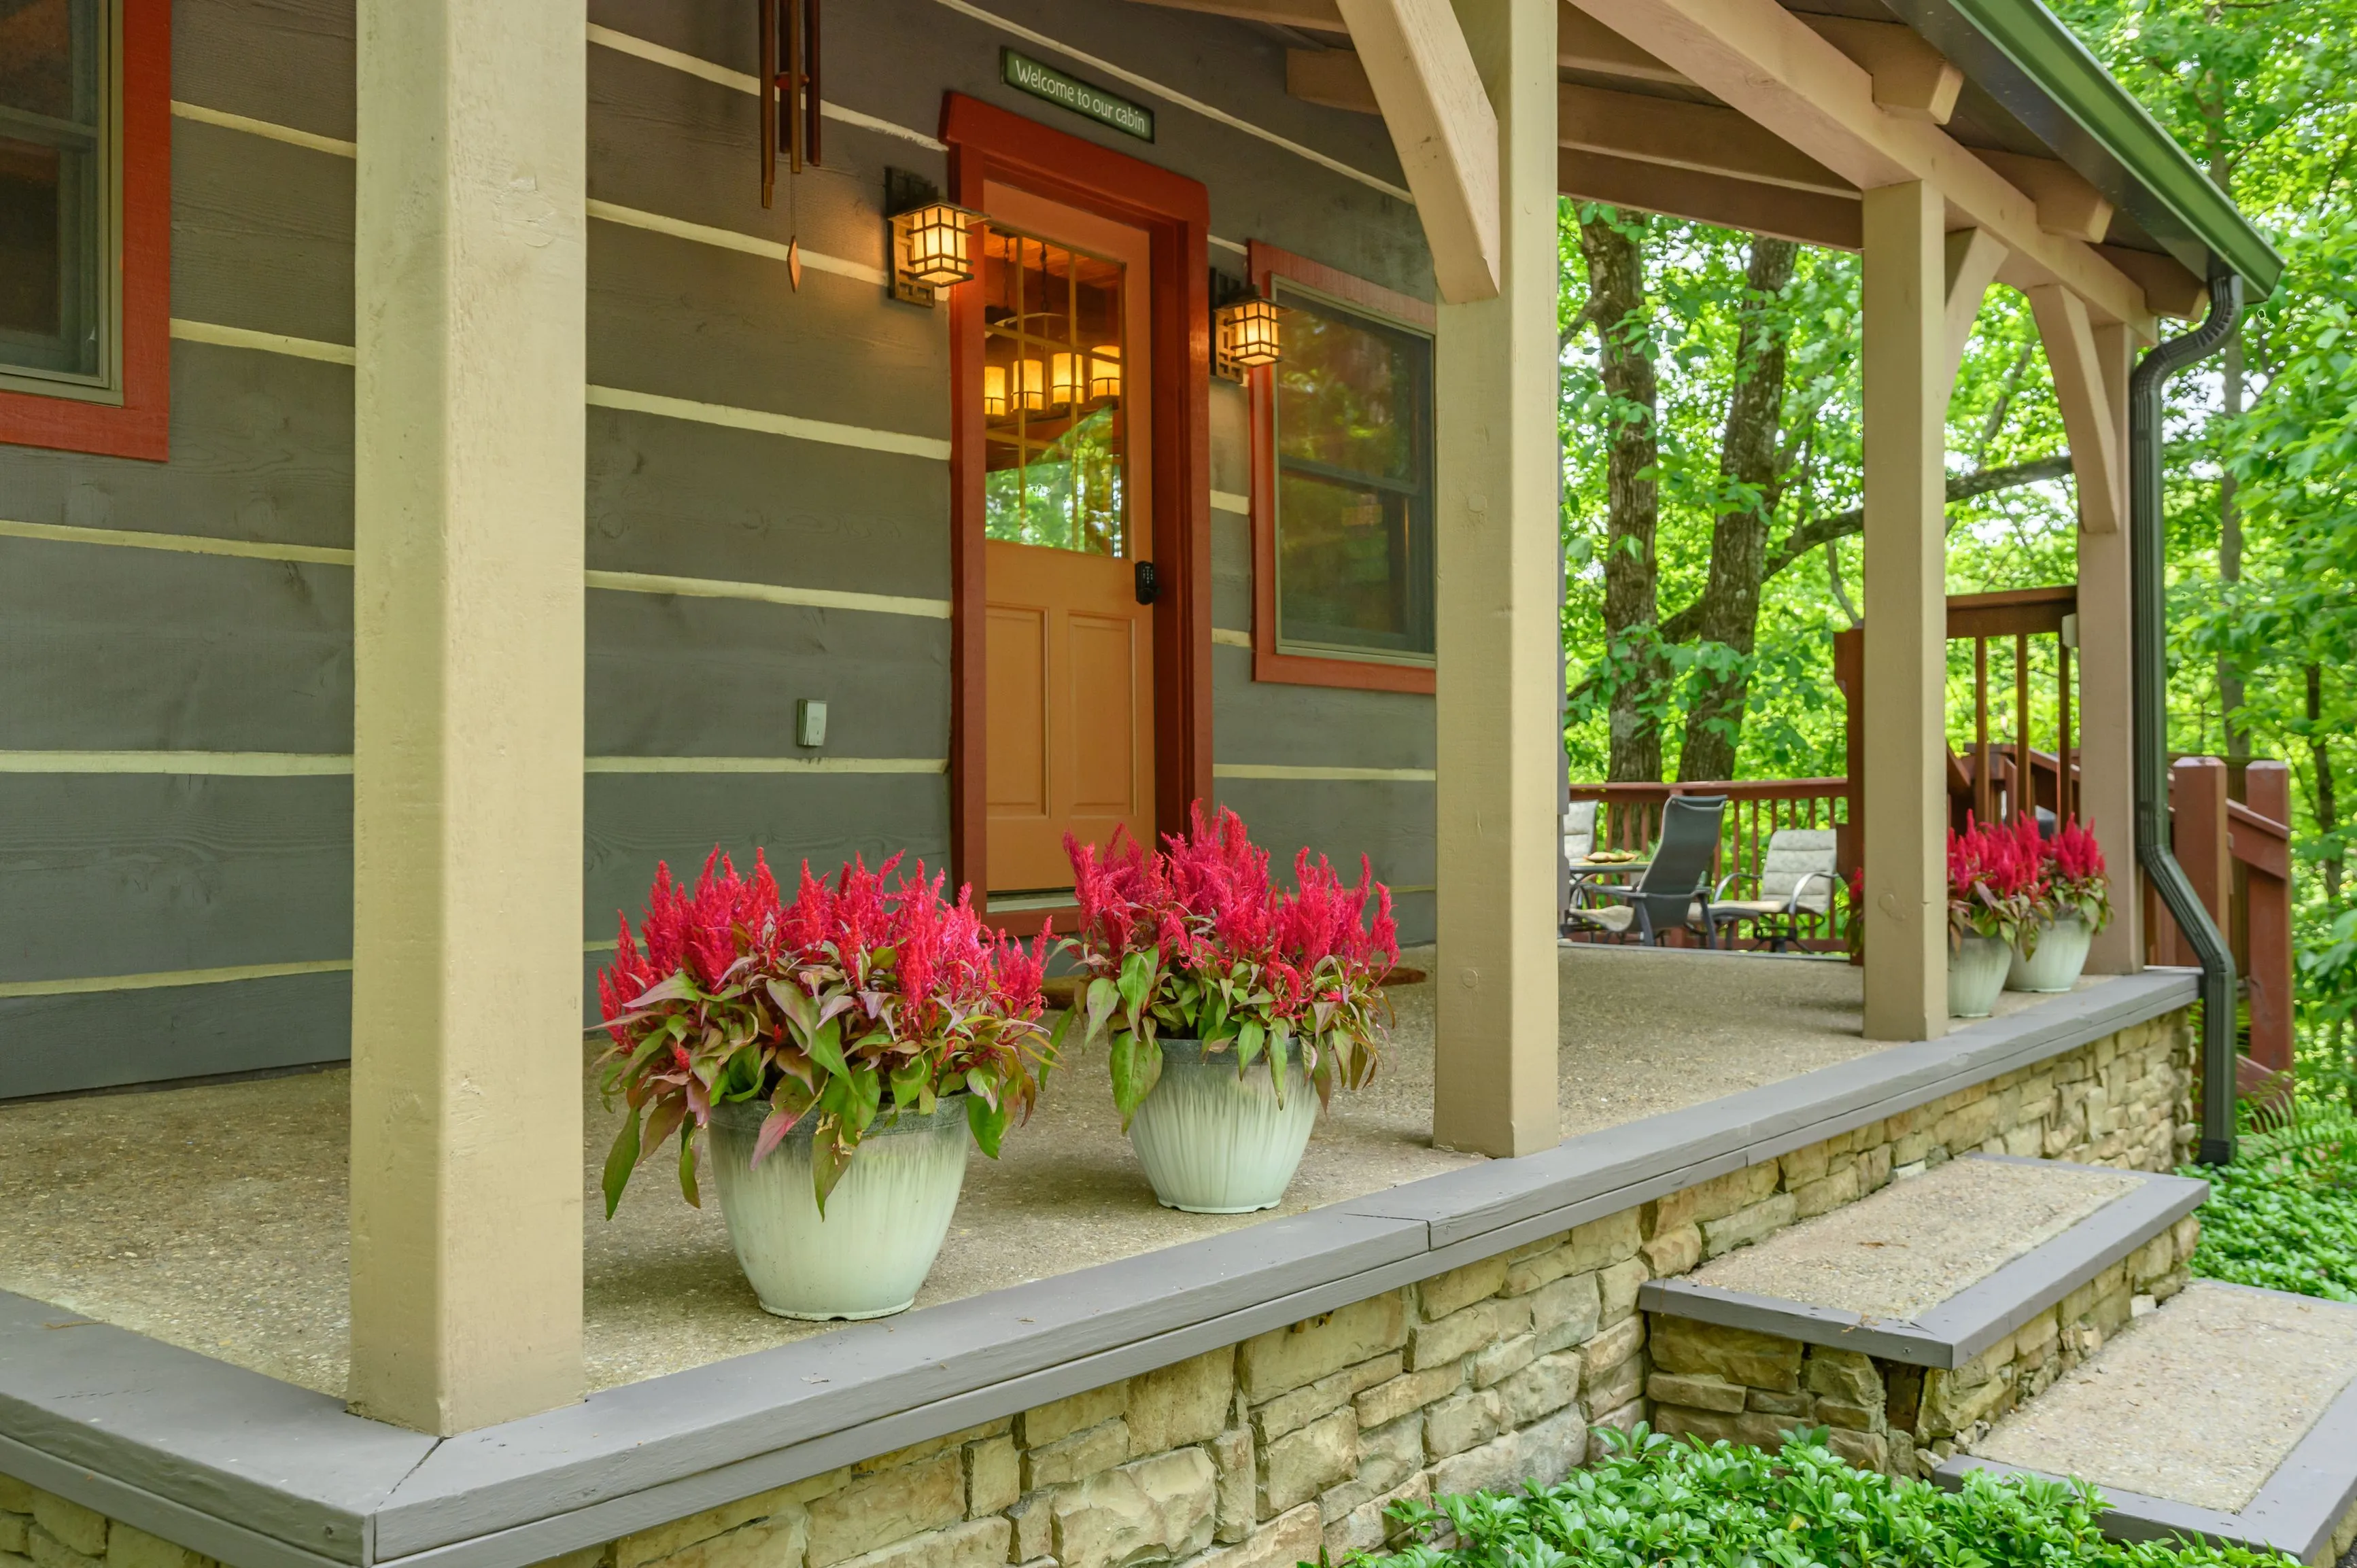 Exterior view of a cozy cottage with a porch, decorative red flowers in pots, and forest in the background.